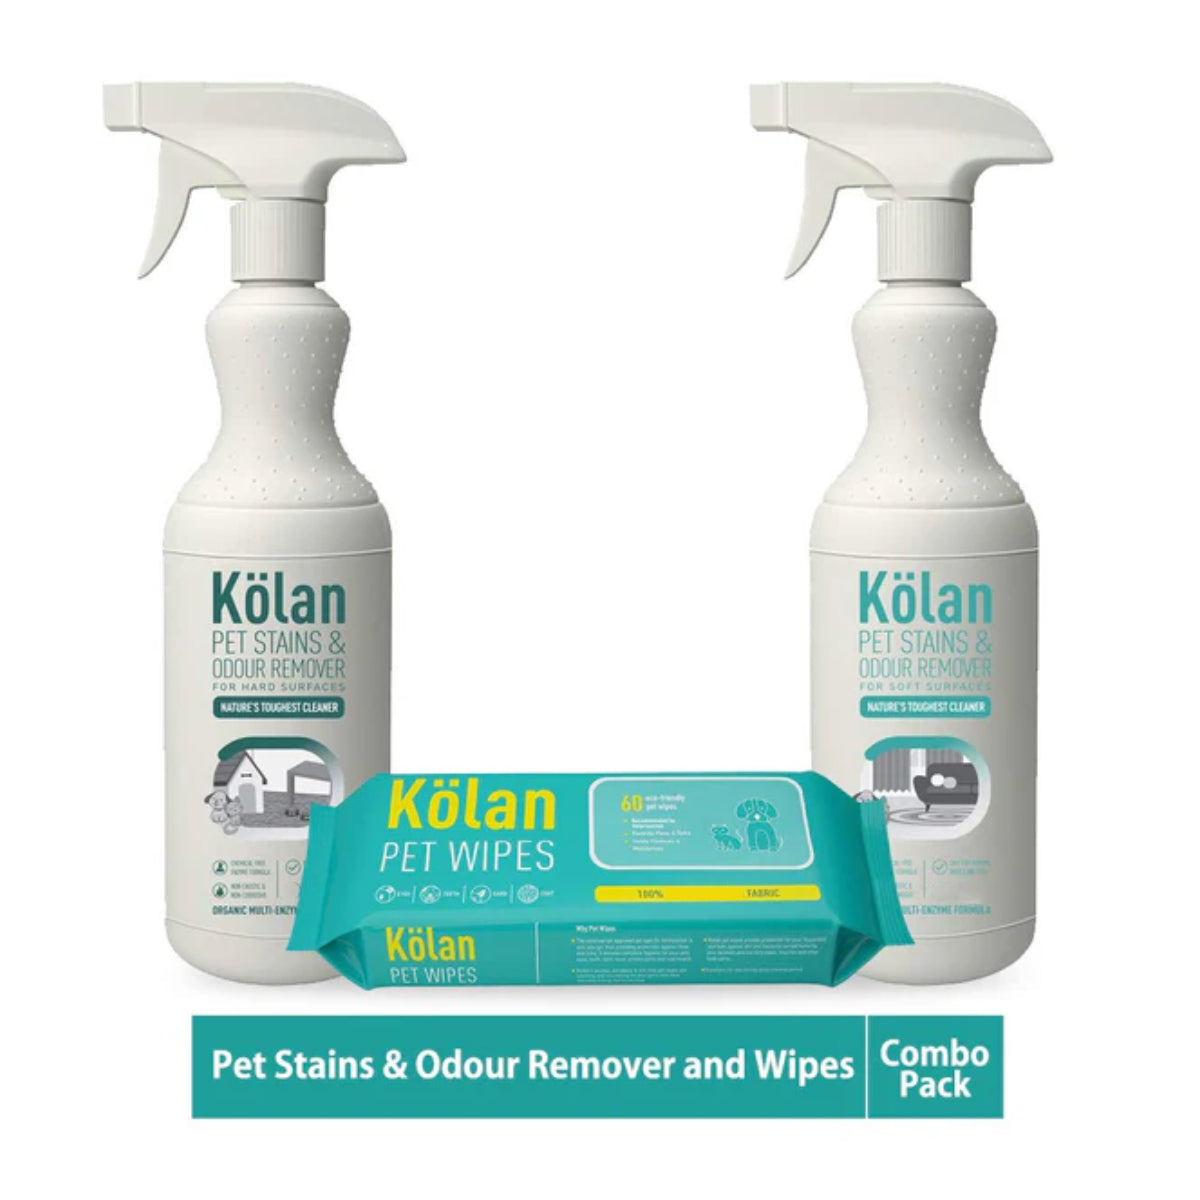 Kolan Organic Pet Stains & Odour Remover || for Hard & Soft Surfaces || 700 ml Each and Pet Wipes for Dogs, Cats and Other Pets 60 Pcs/Pack - (Combo Pack)